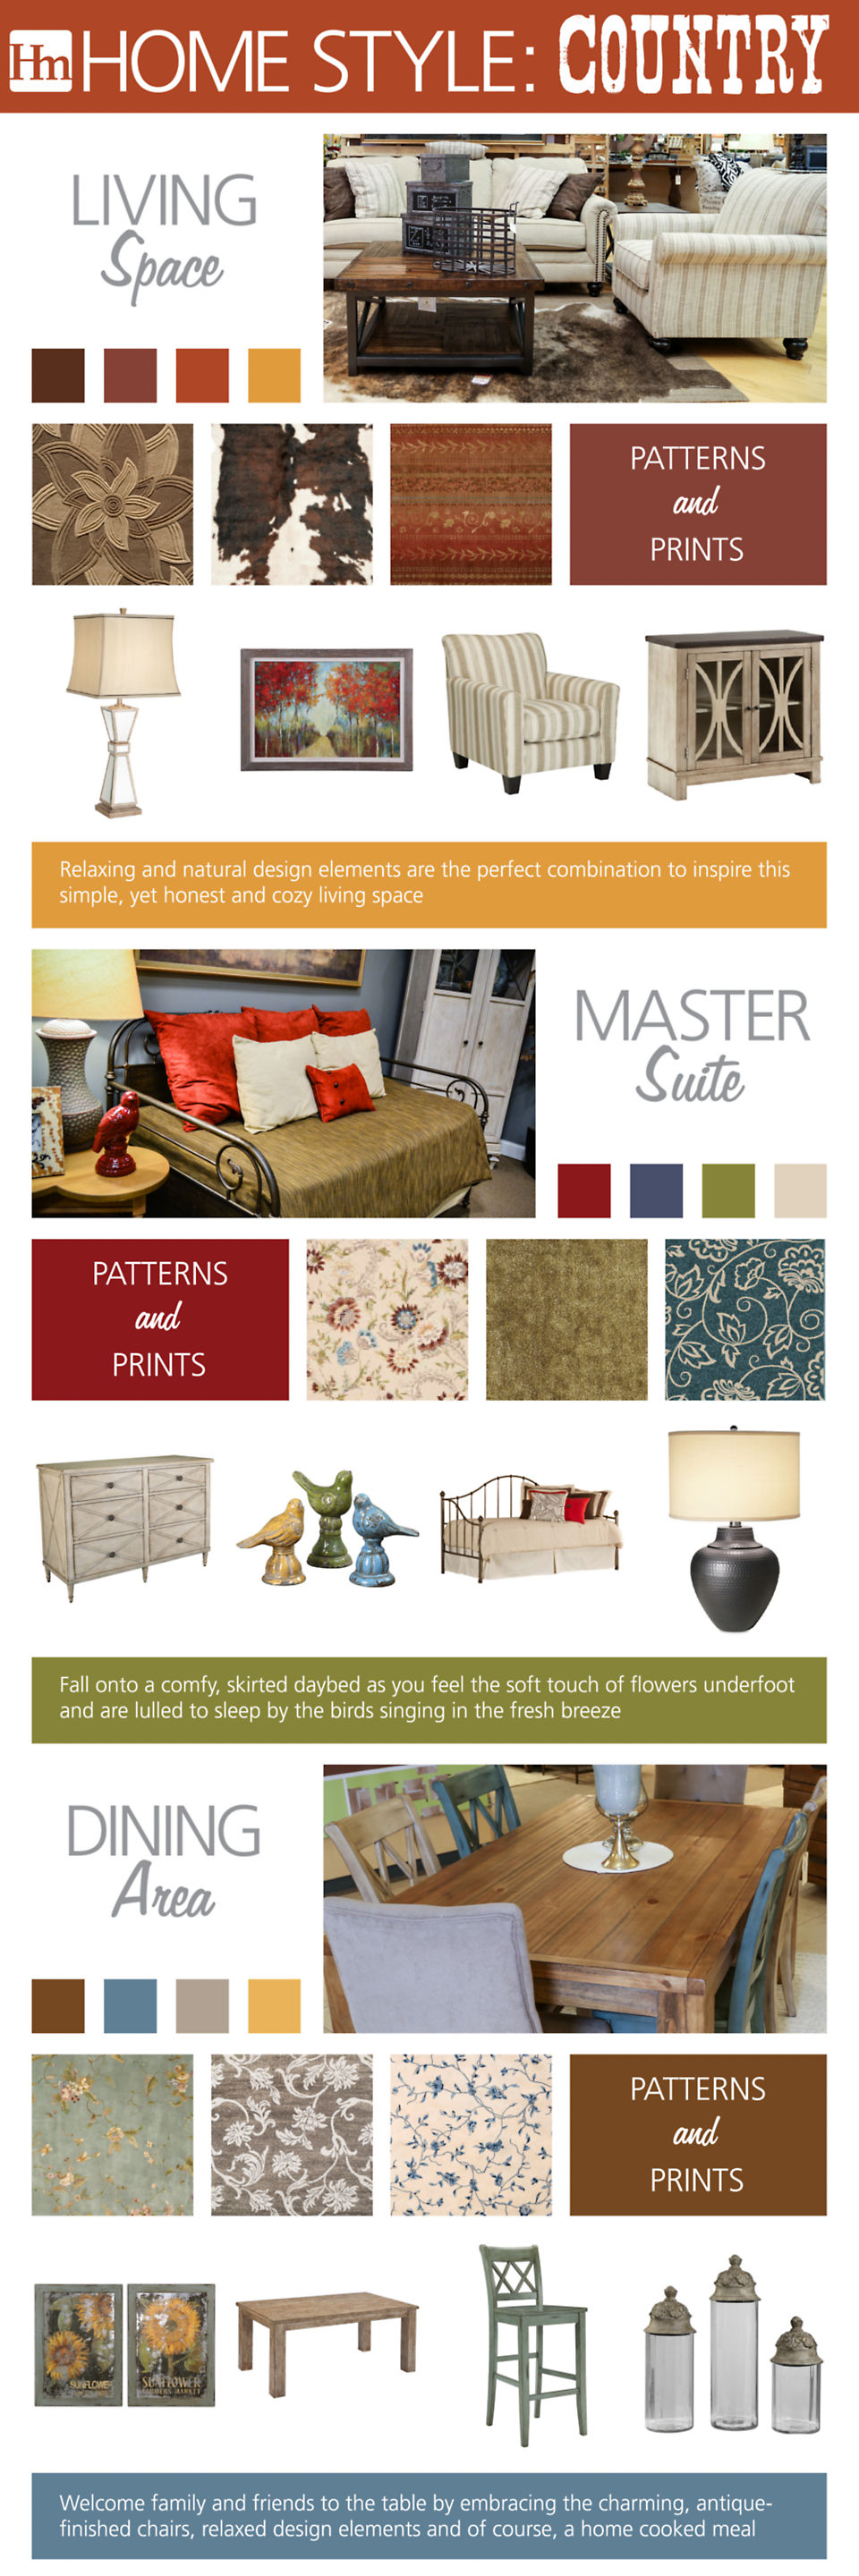 Rustic country interior design style infographic